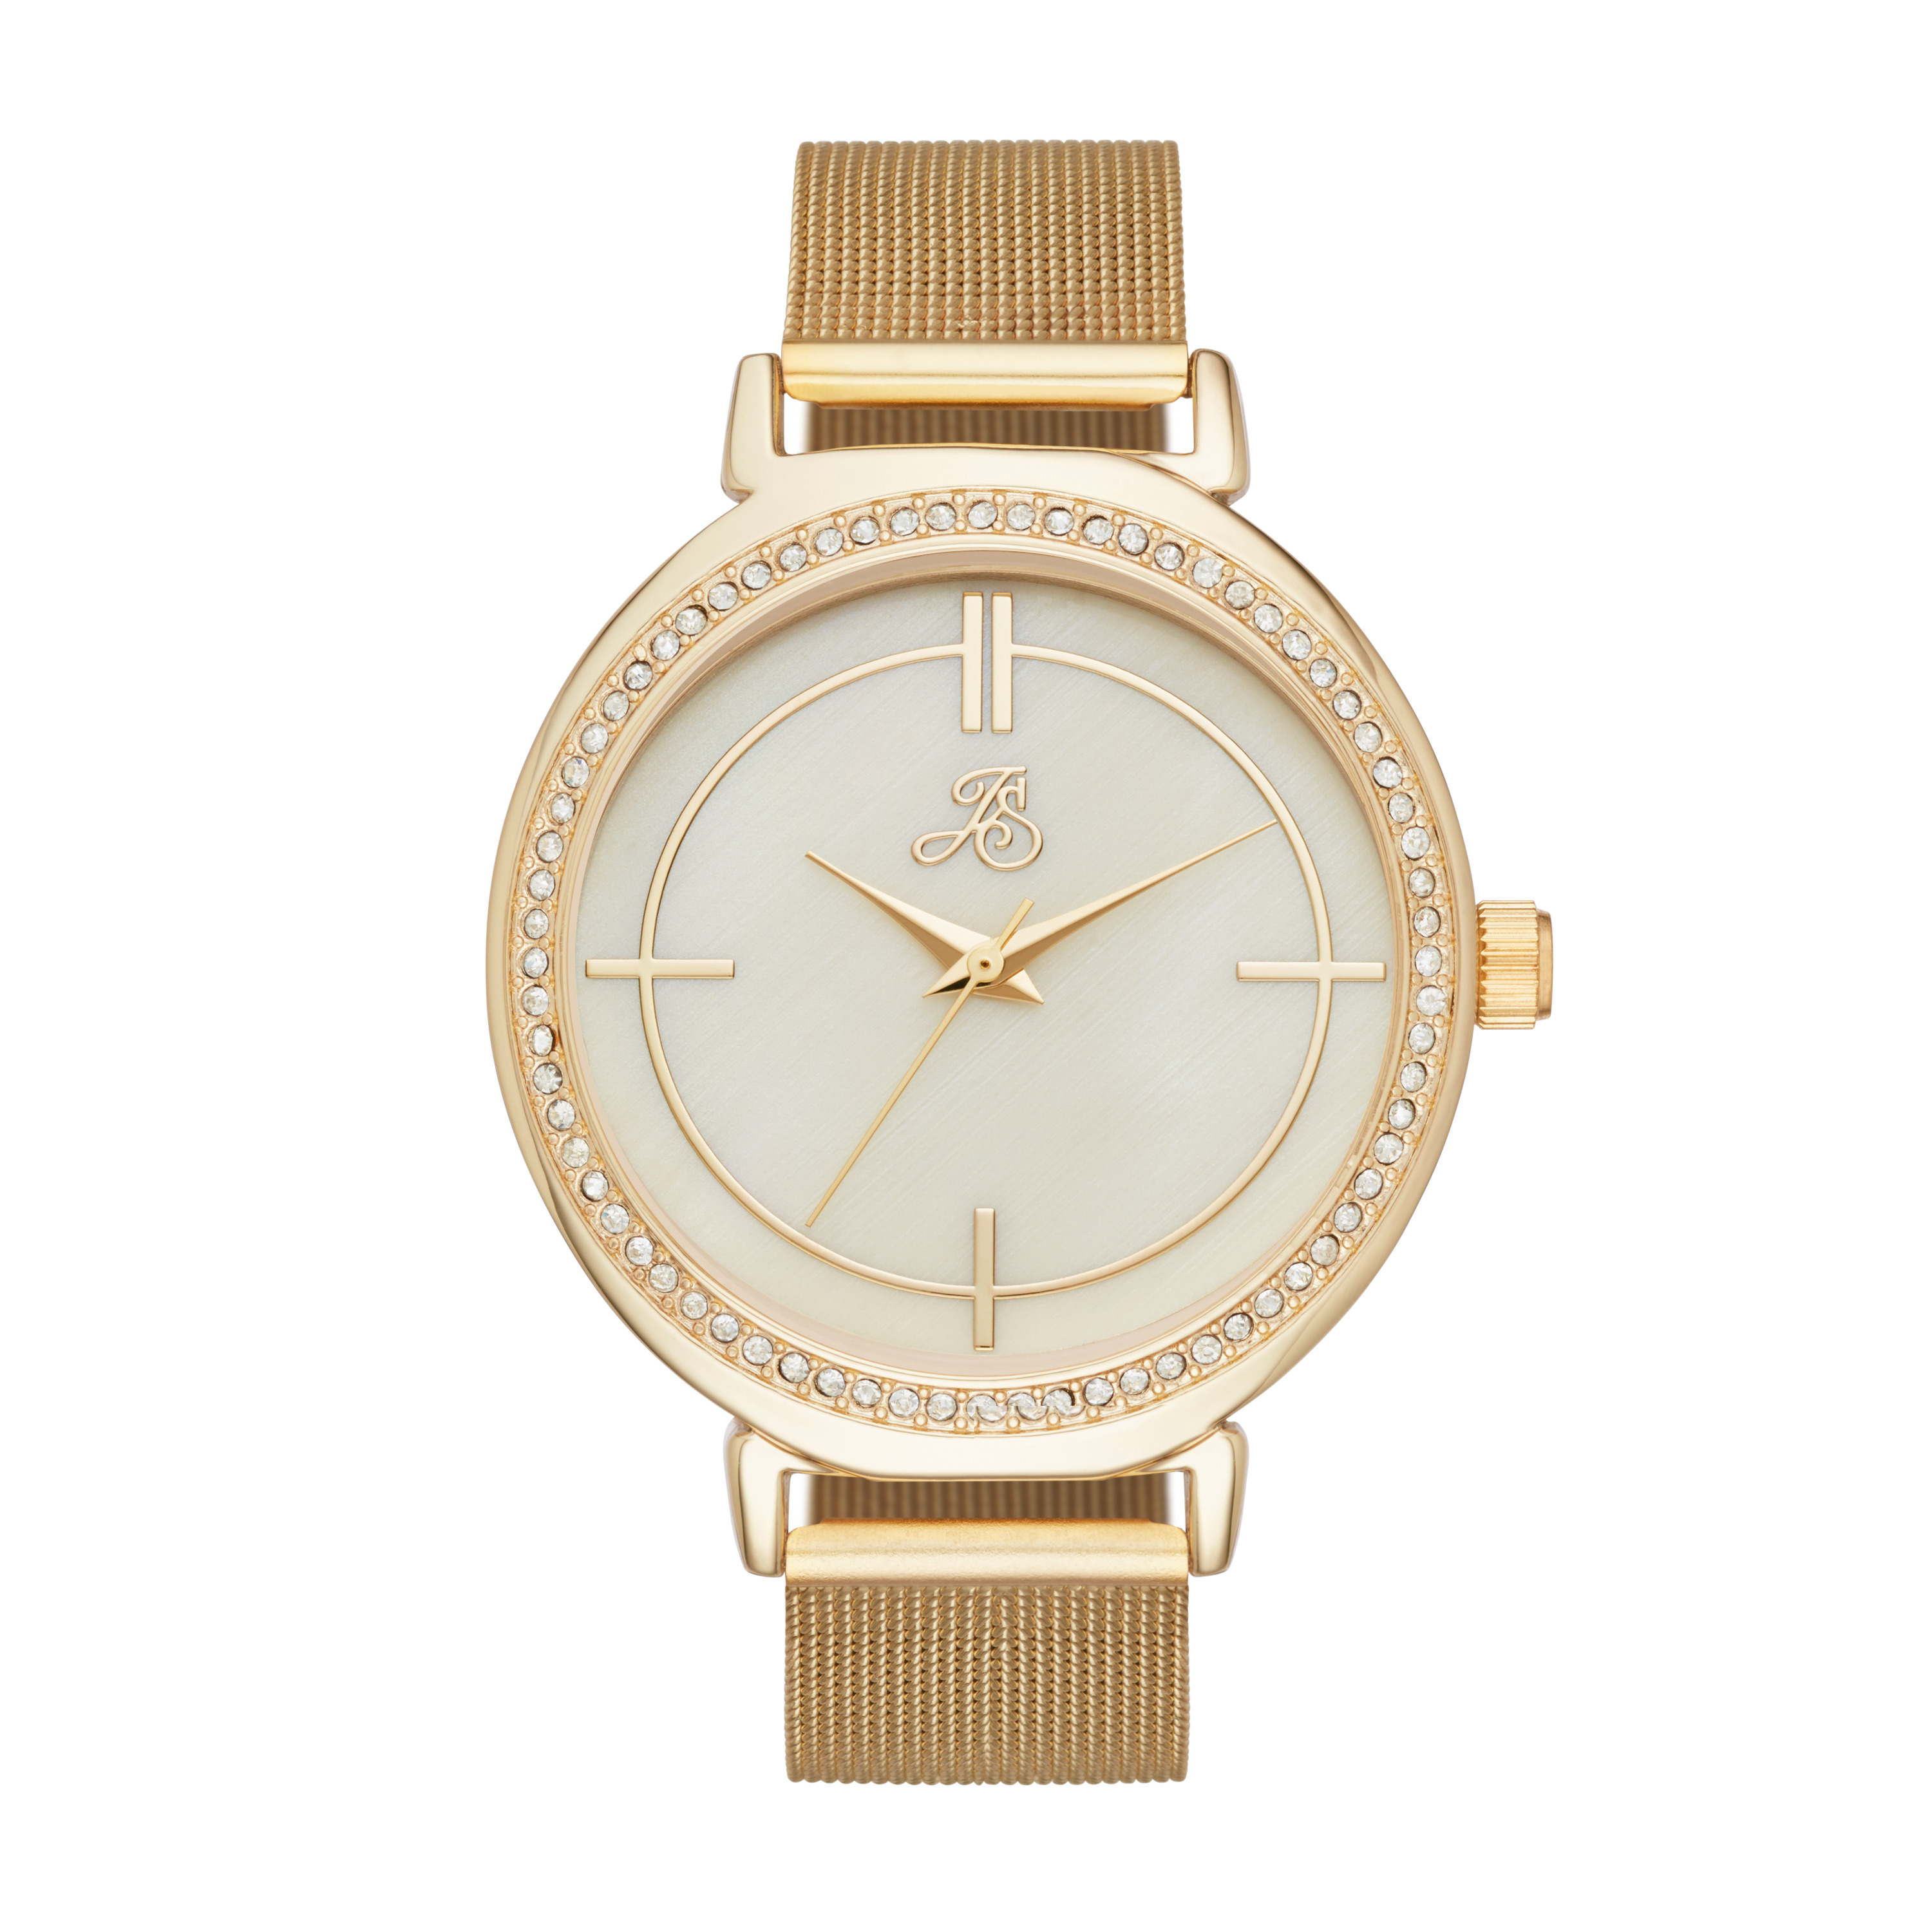 Jaclyn Smith Ladies Gold Mesh Watch